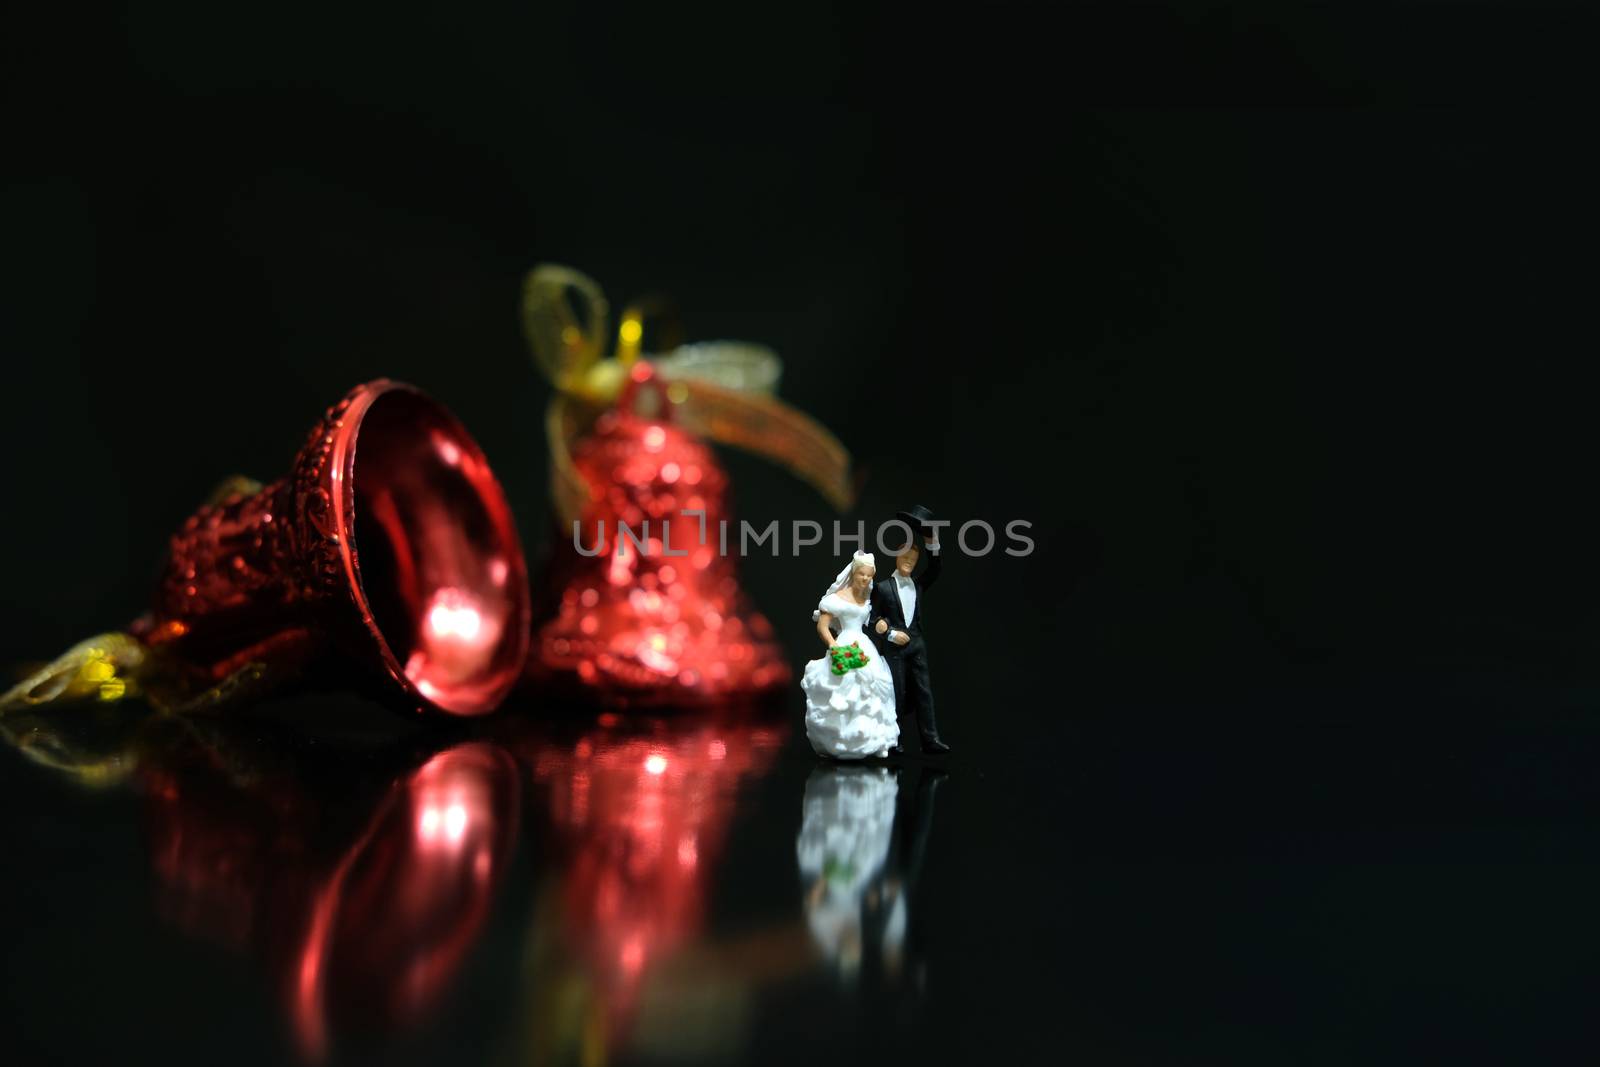 Miniature wedding concept. Bride and groom walking out make greeting after wedding procession. image photo